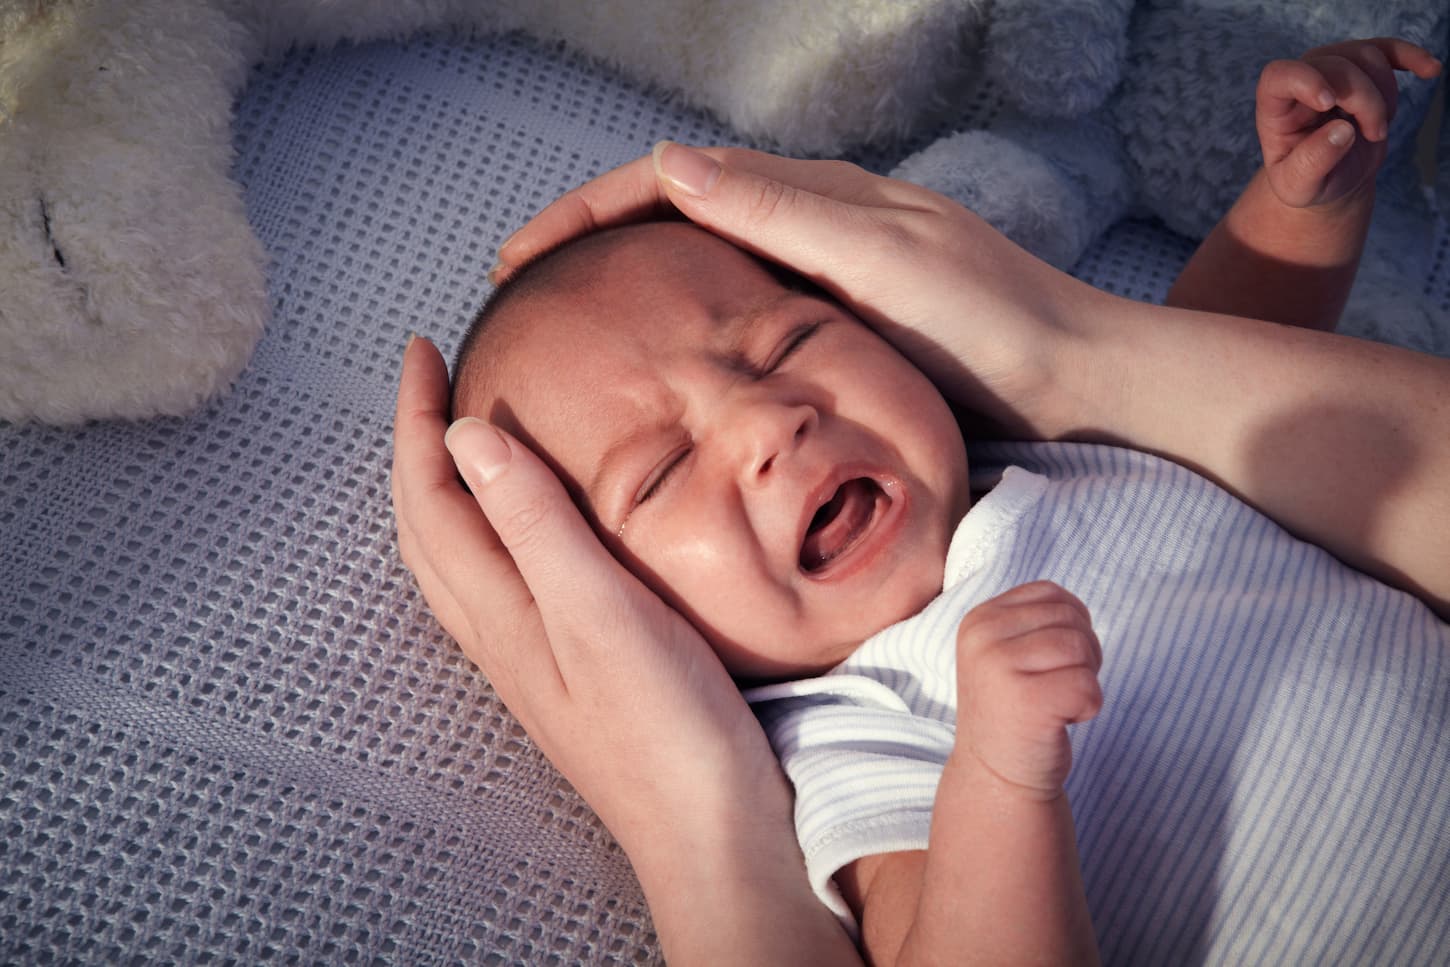 An image of a baby boy crying in a crib before going to bed.